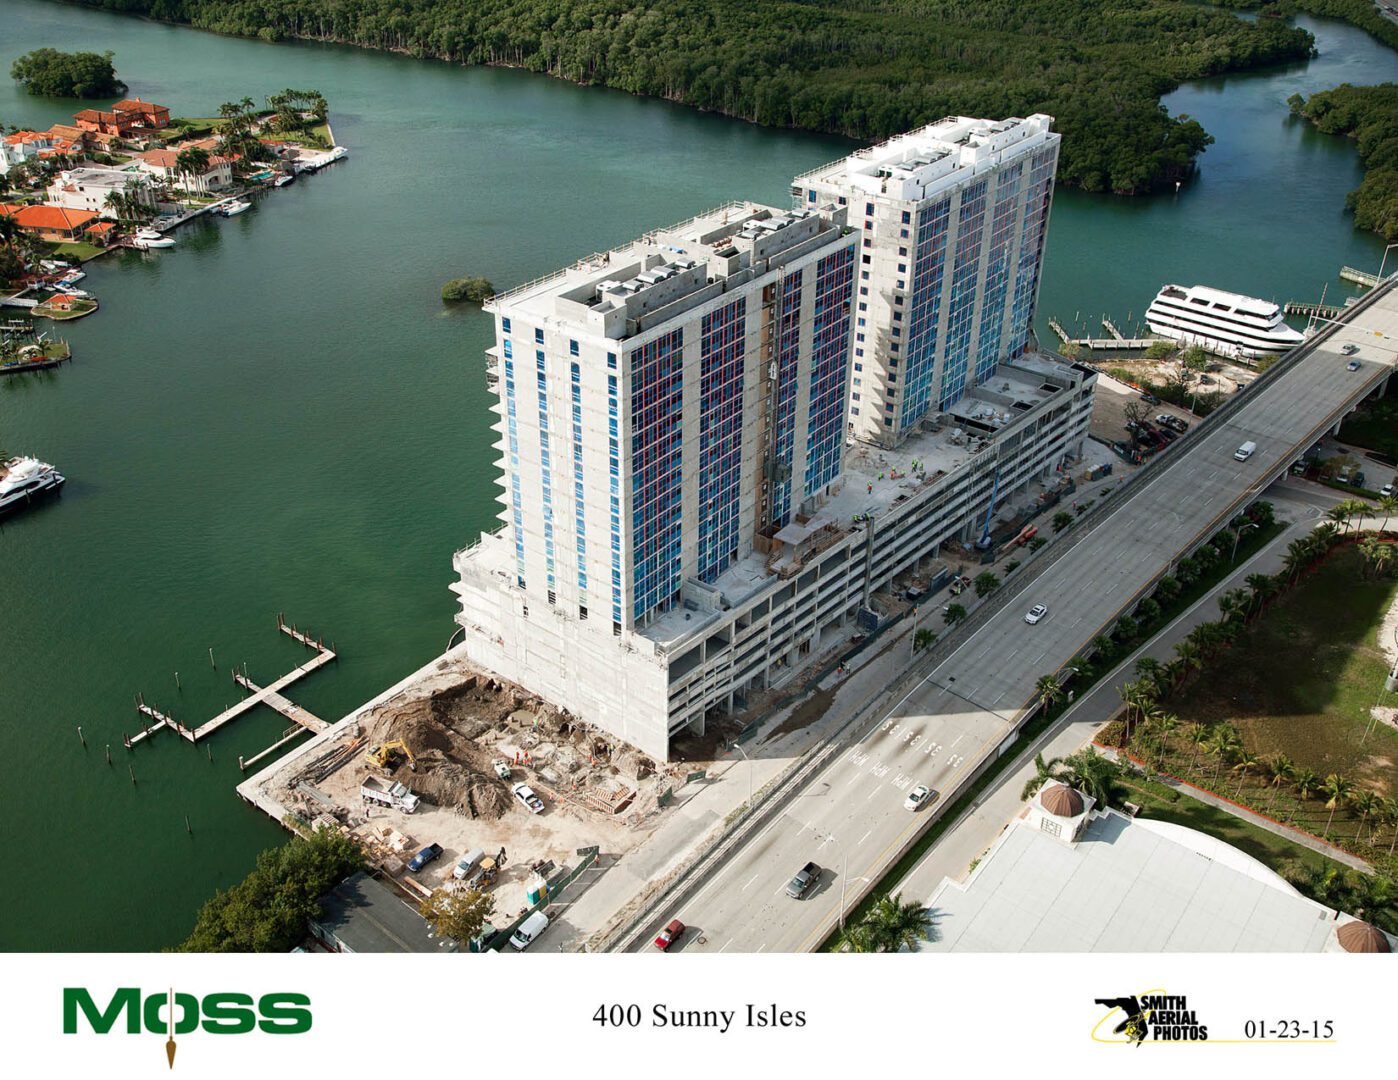 Aerial View of Past Moss Condos Project in Miami, Florida.